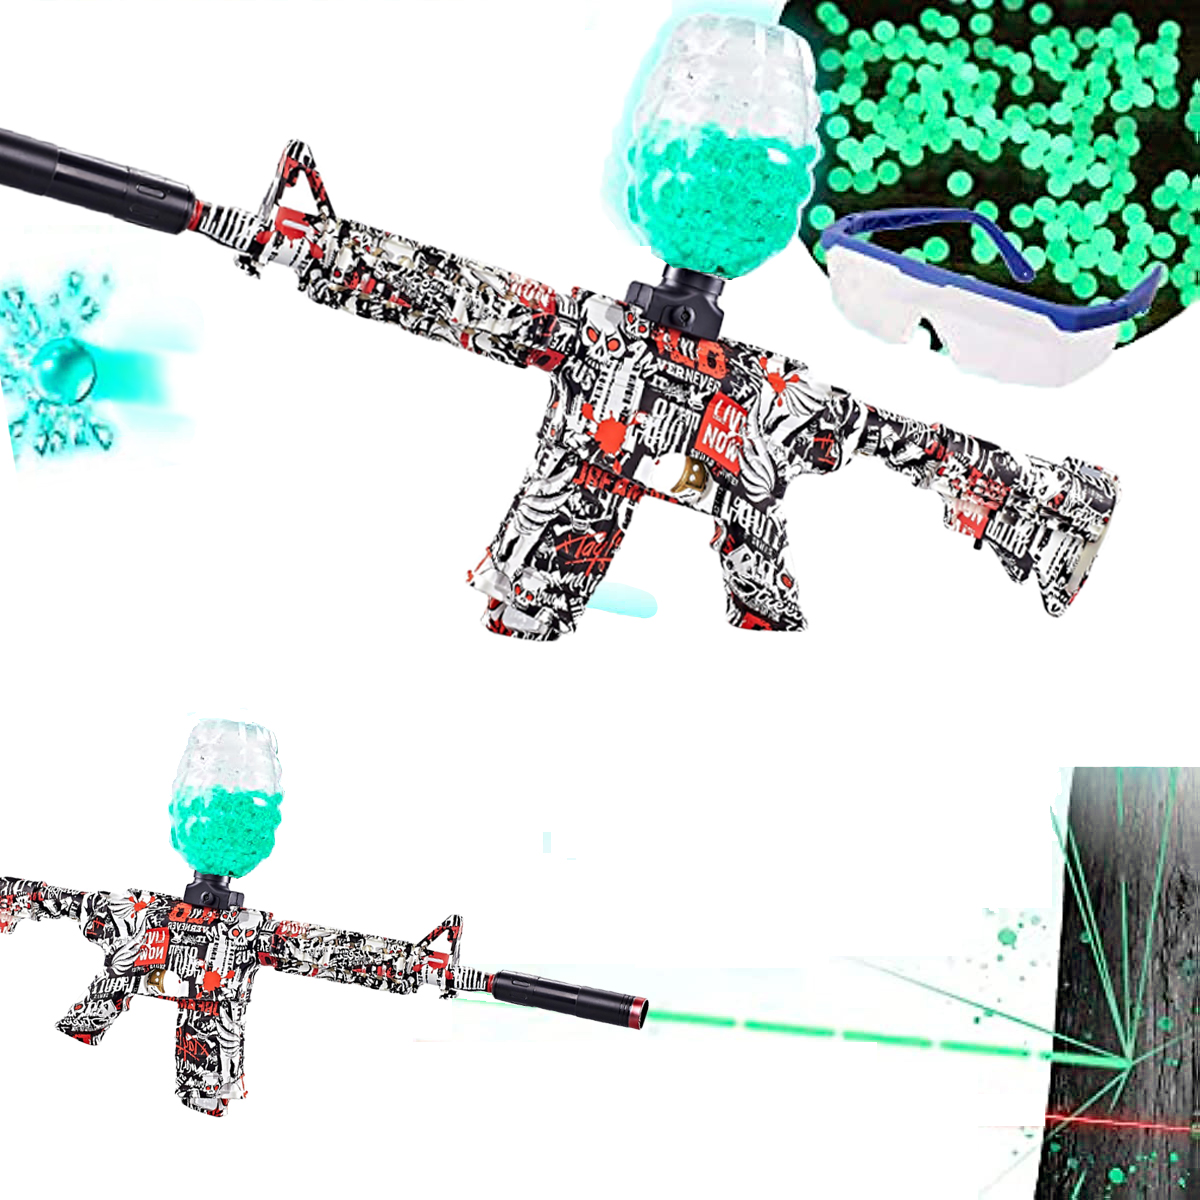 Anstoy Gel Ball Blaster, Gel Bullet Blaster with High-Speed Automatic Splat  Shooting Games in Outdoors for Ages 18+